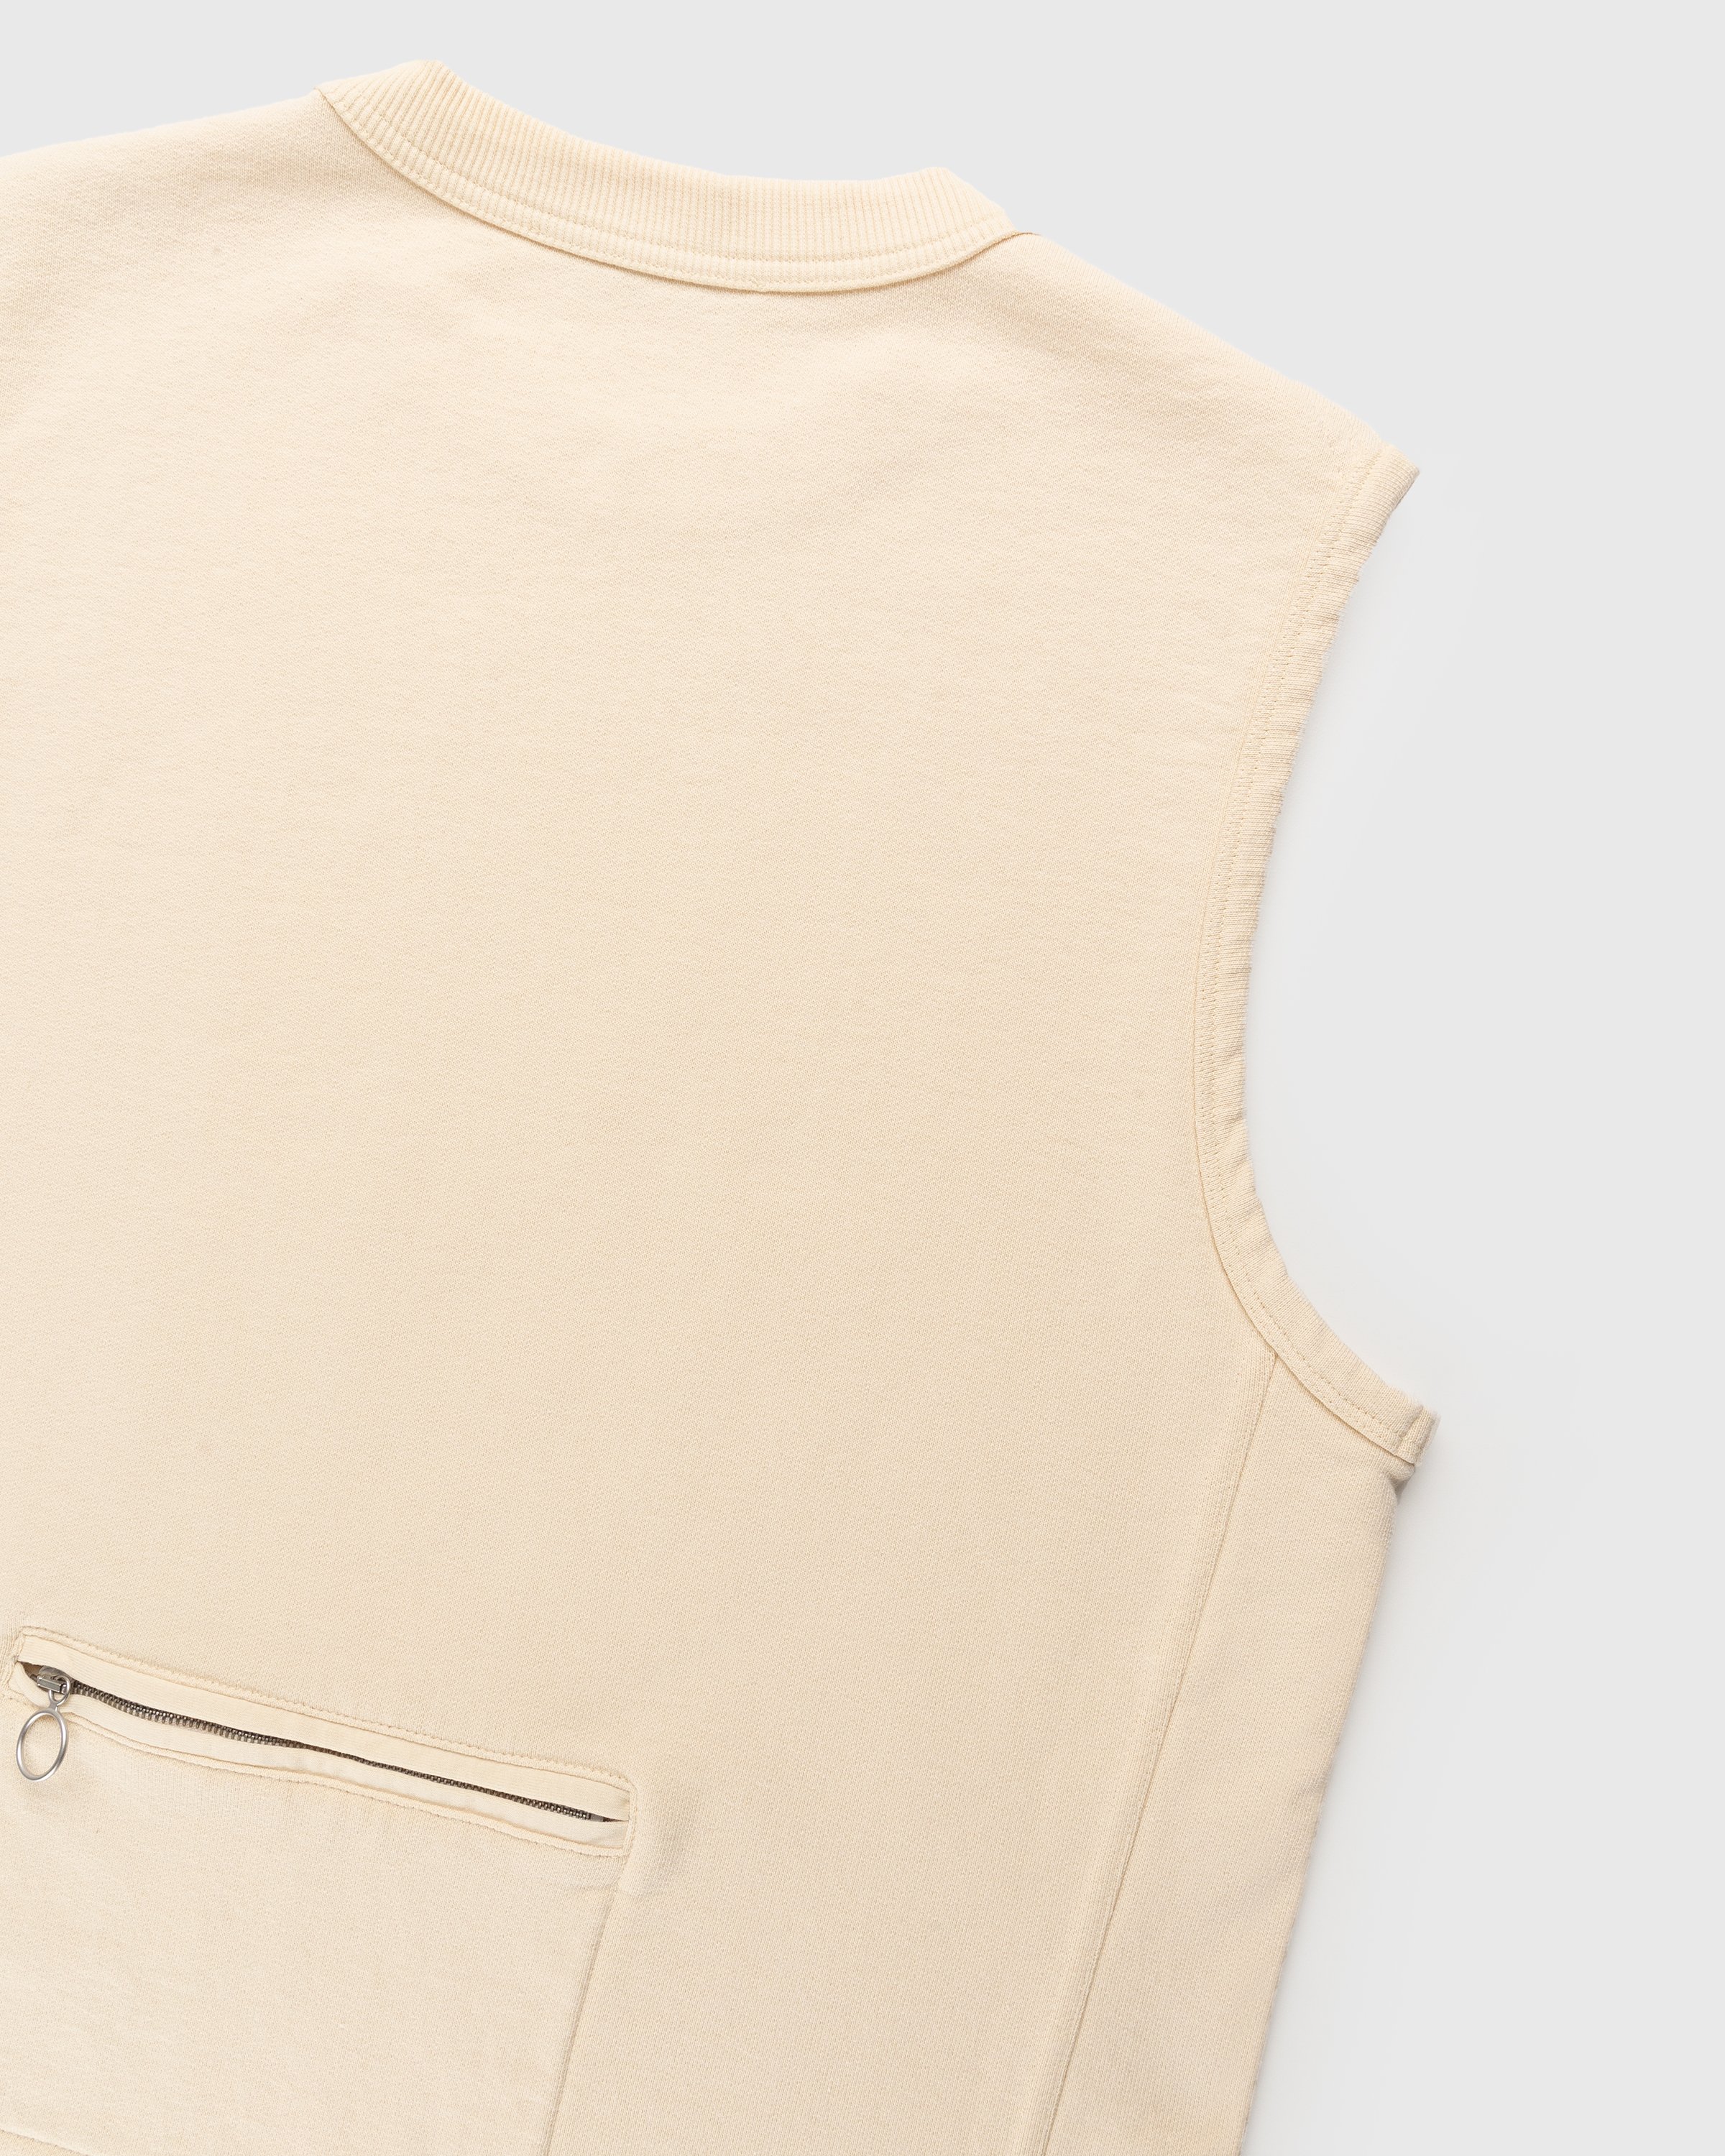 Diomene by Damir Doma - Cotton Gilet Cloud Cream - Clothing - Beige - Image 3